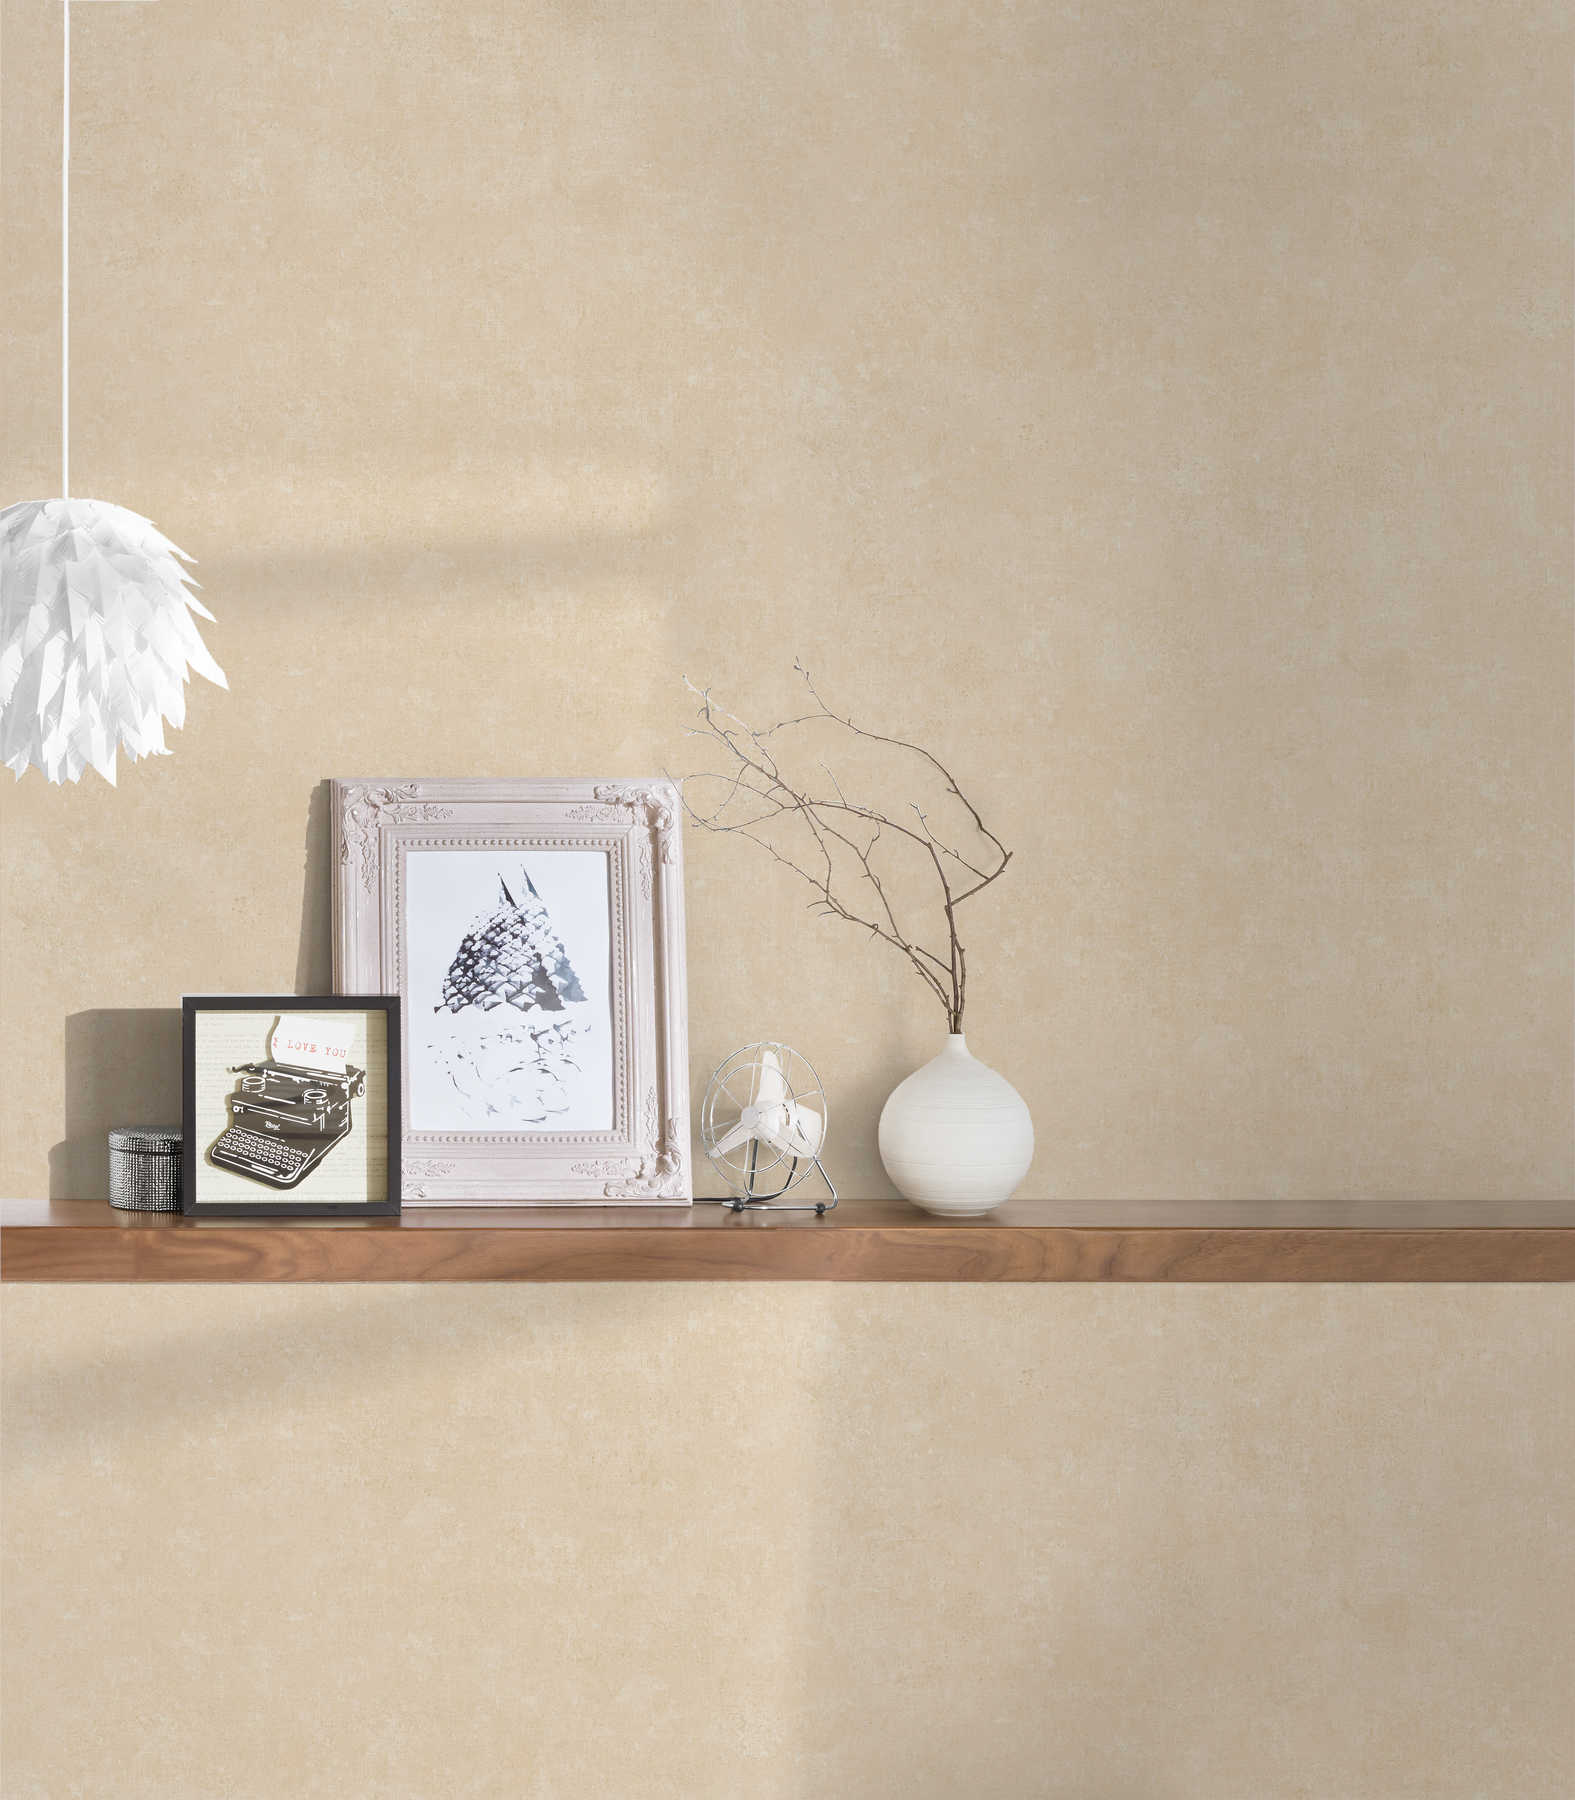             wallpaper plain with colour hatching in vintage look - beige
        